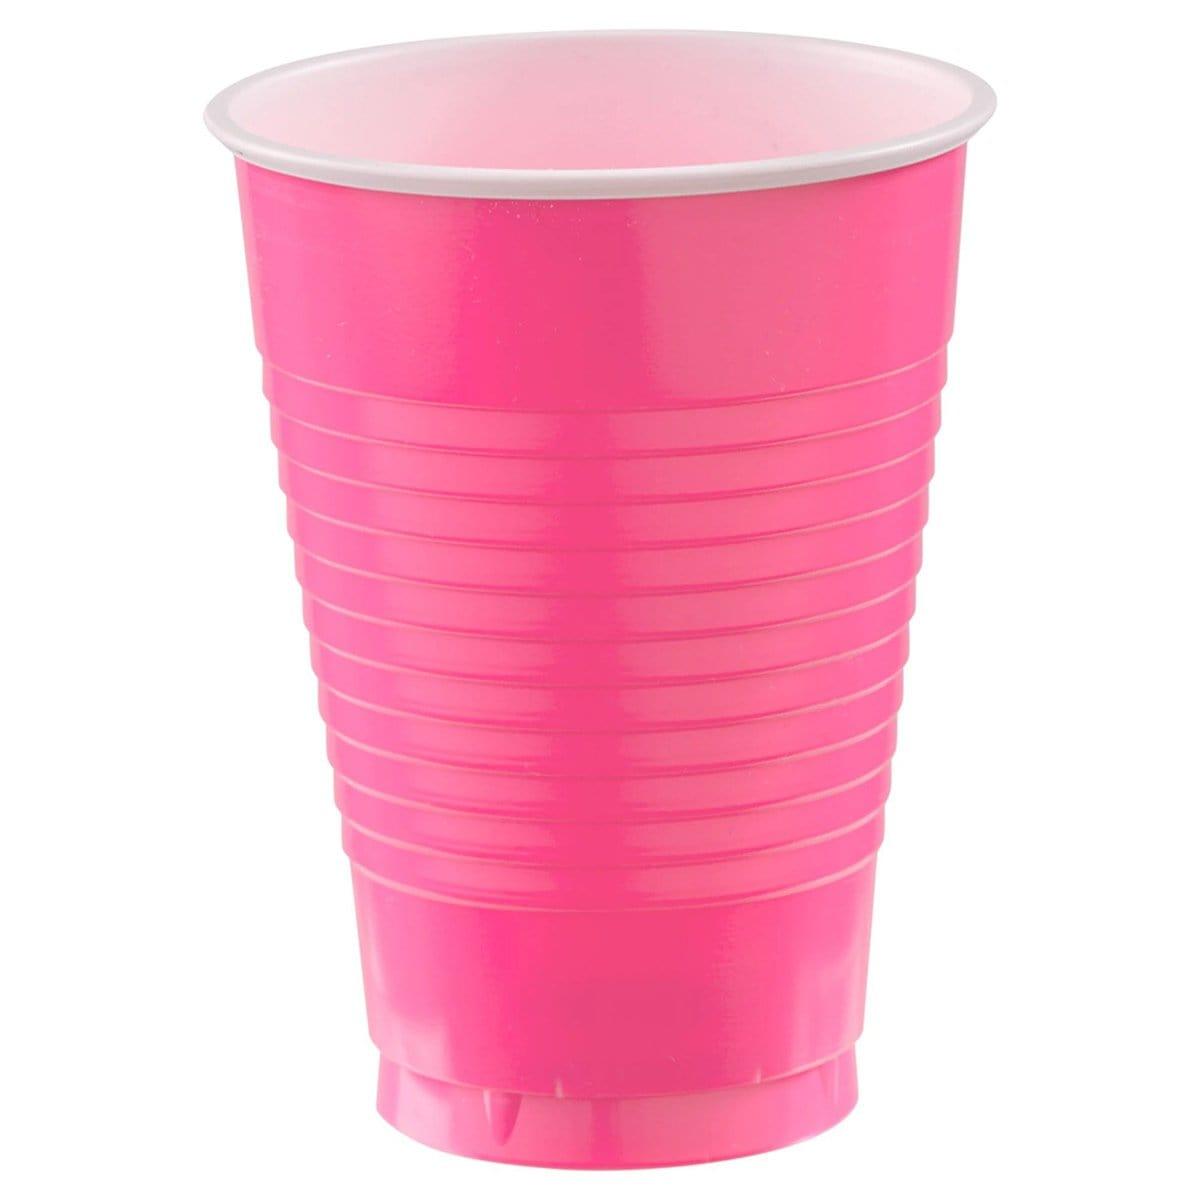 Buy plasticware Bright Pink Plastic Cups, 12 oz., 20 Count sold at Party Expert